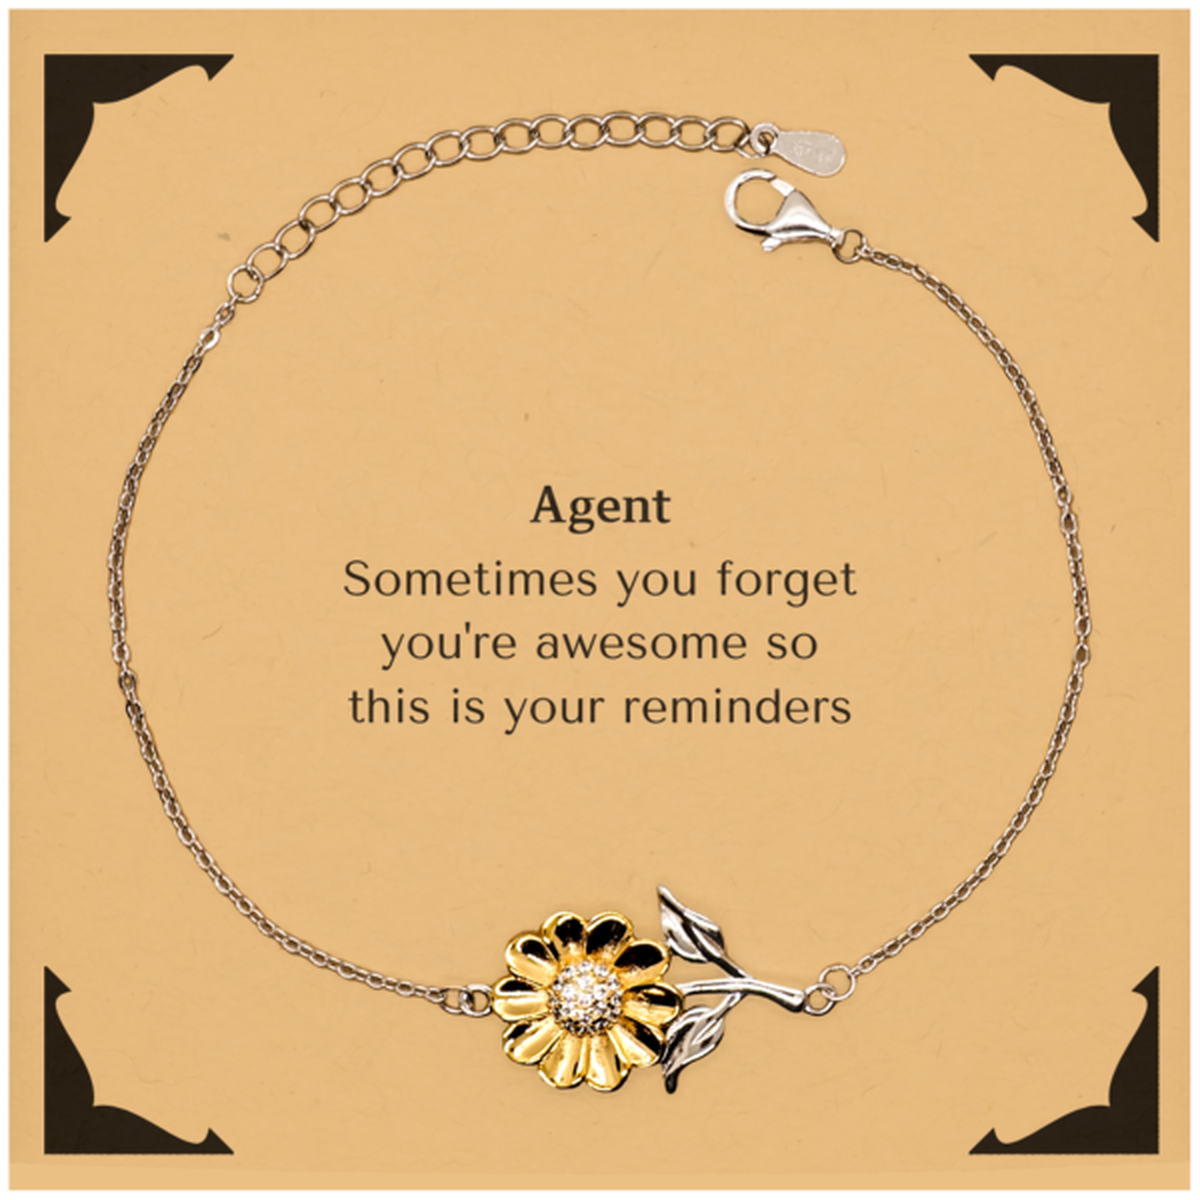 Sentimental Agent Sunflower Bracelet, Agent Sometimes you forget you're awesome so this is your reminders, Graduation Christmas Birthday Gifts for Agent, Men, Women, Coworkers